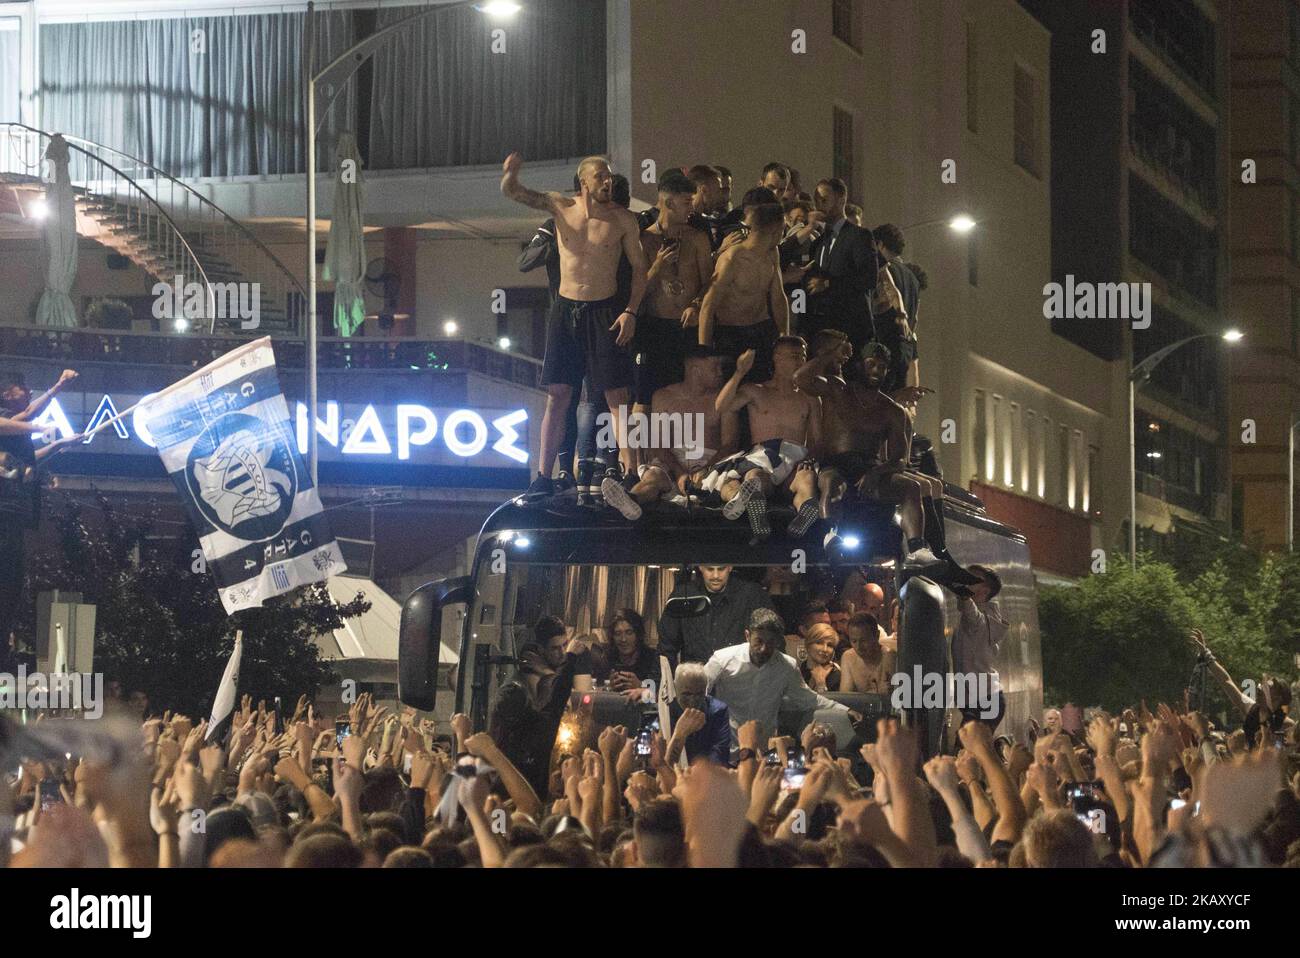 PAOK FC, the football team based in Thessaloniki, Greece, won on May 12, 2018 in Athens, inside the Olympic stadium playing with opponent team AEK. There have been some incidents during, before and after the game. In Thessaloniki everything was powerful. People welcomed the team on the bus with the cup in front of the city's landmark, The White Tower. Among the people was Ivan Savvidis, a Russian businessman who is forbidden to enter for 2 years in the greek stadiums. (Photo by Nicolas Economou/NurPhoto) Stock Photo